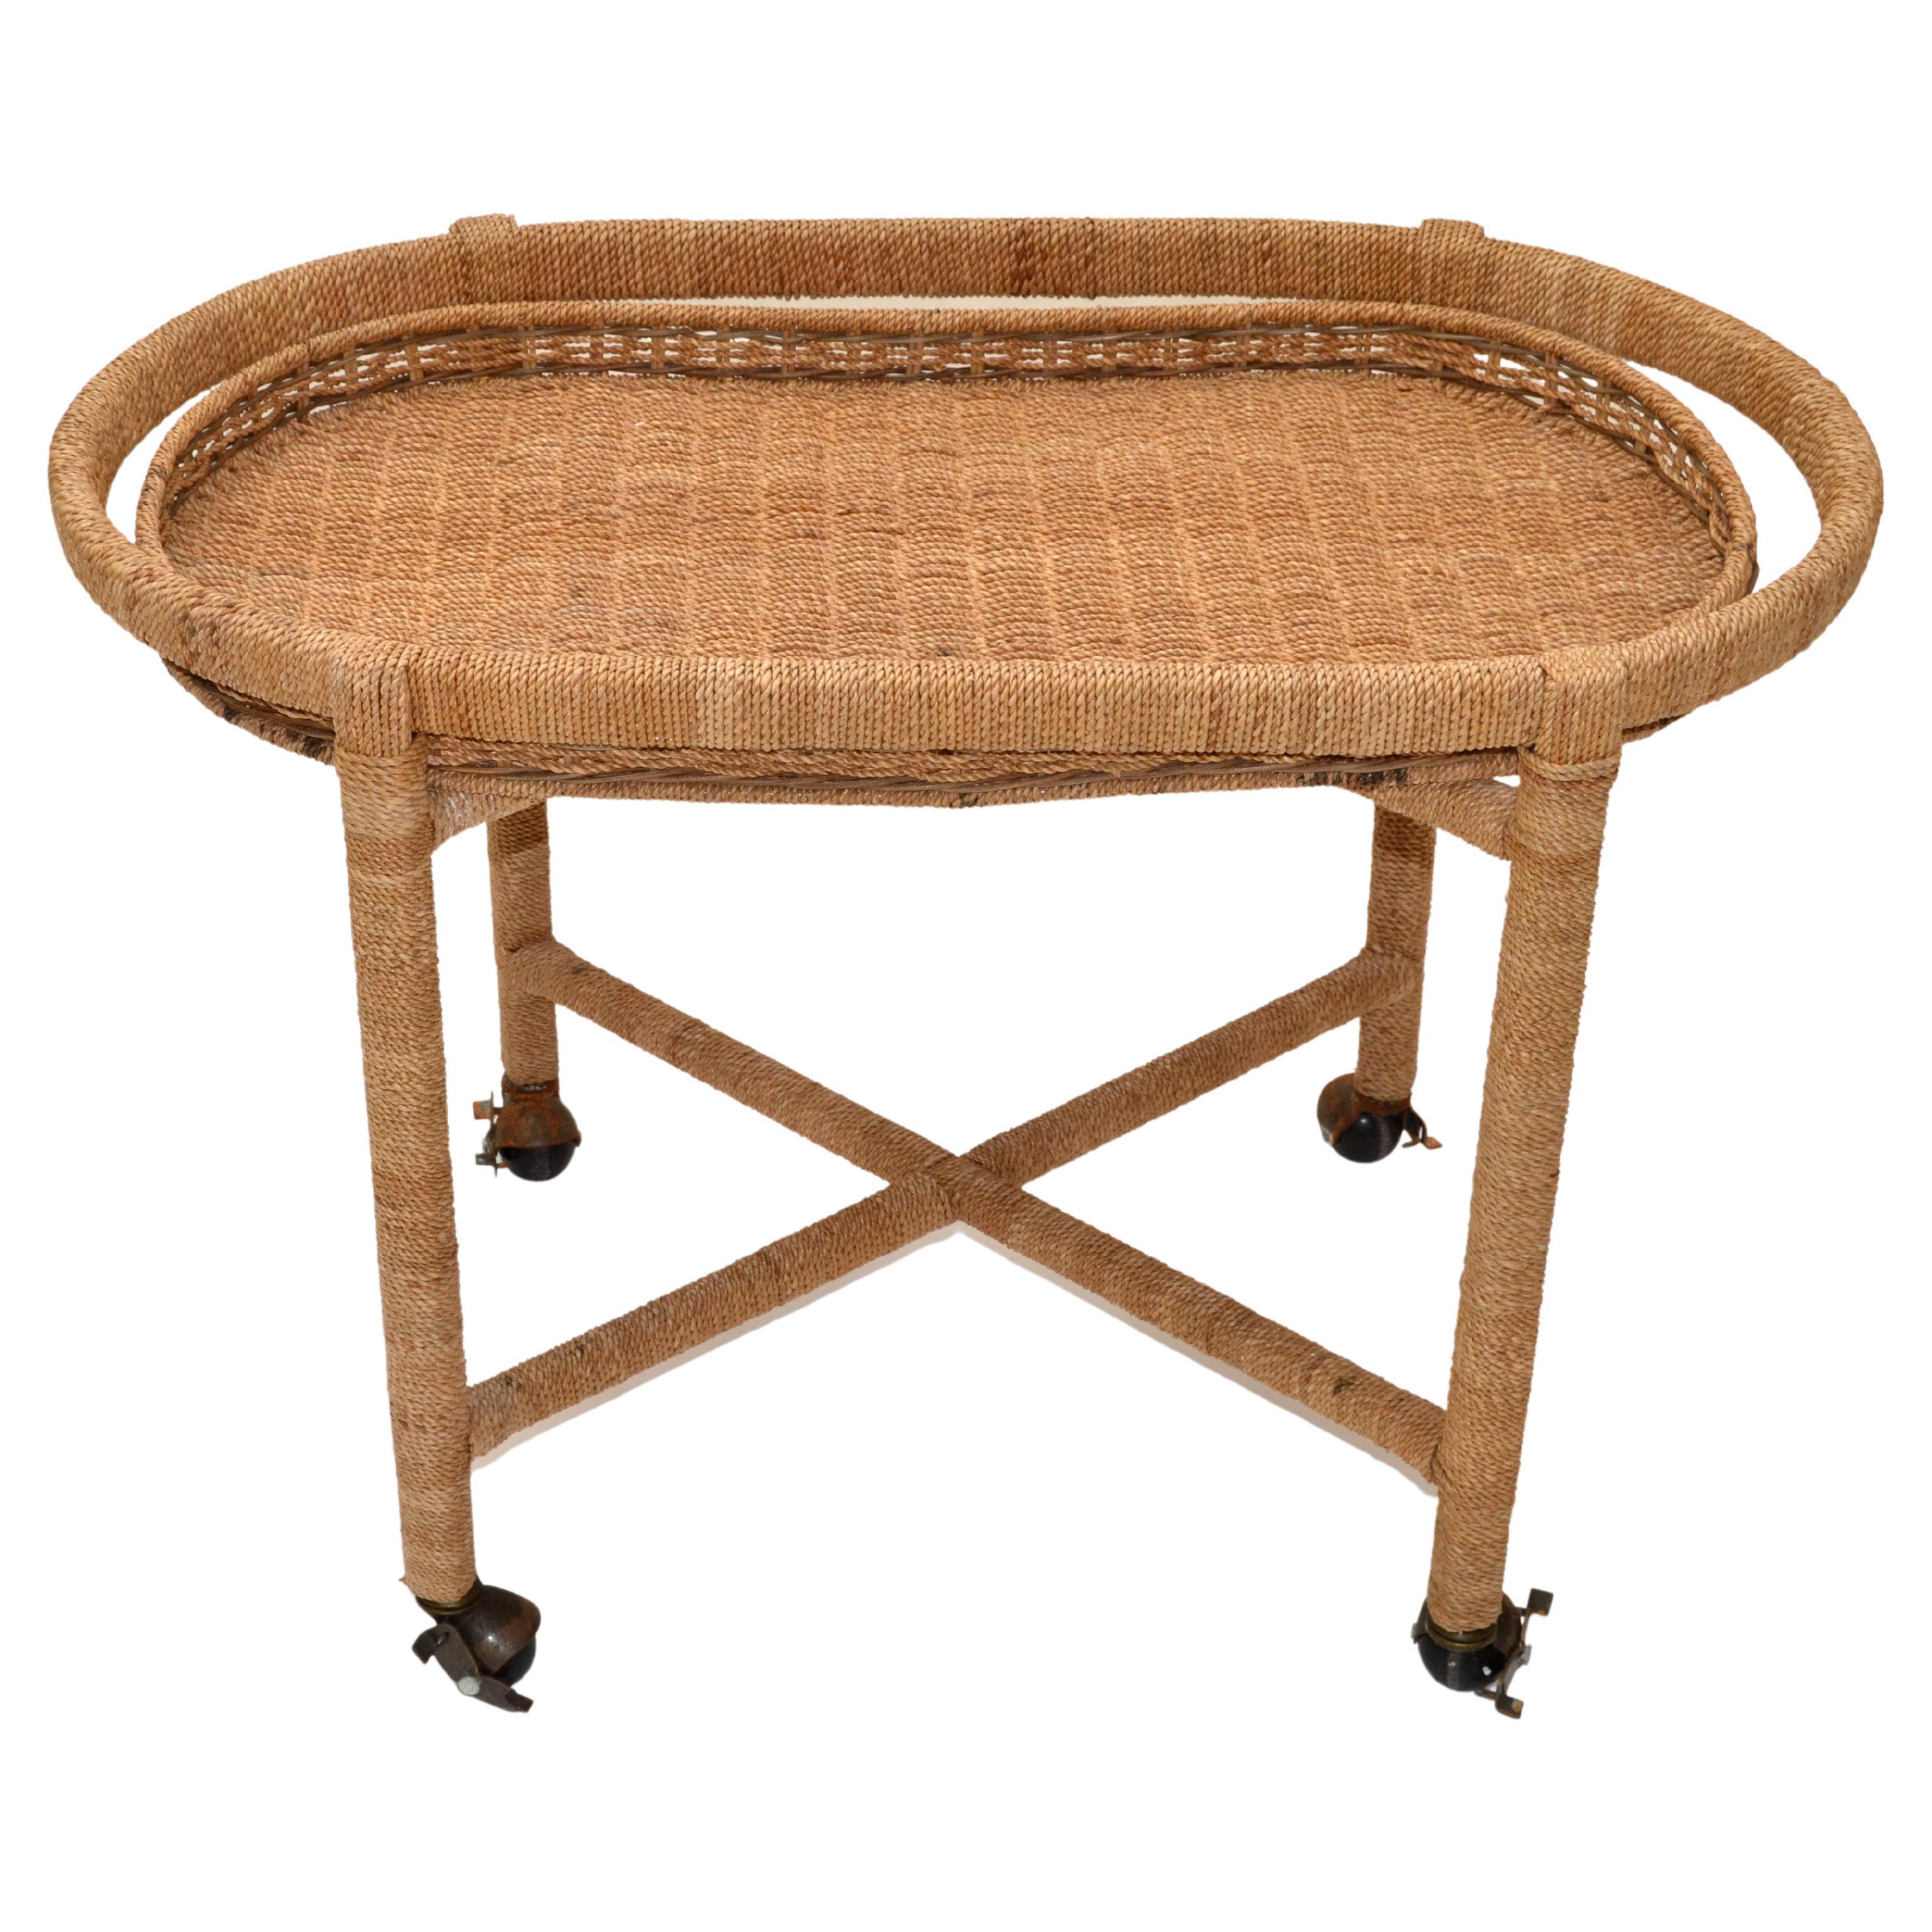 Vintage Mario Lopez Torres Style Rope Wicker Rattan Serving, Bar Cart Tray Table